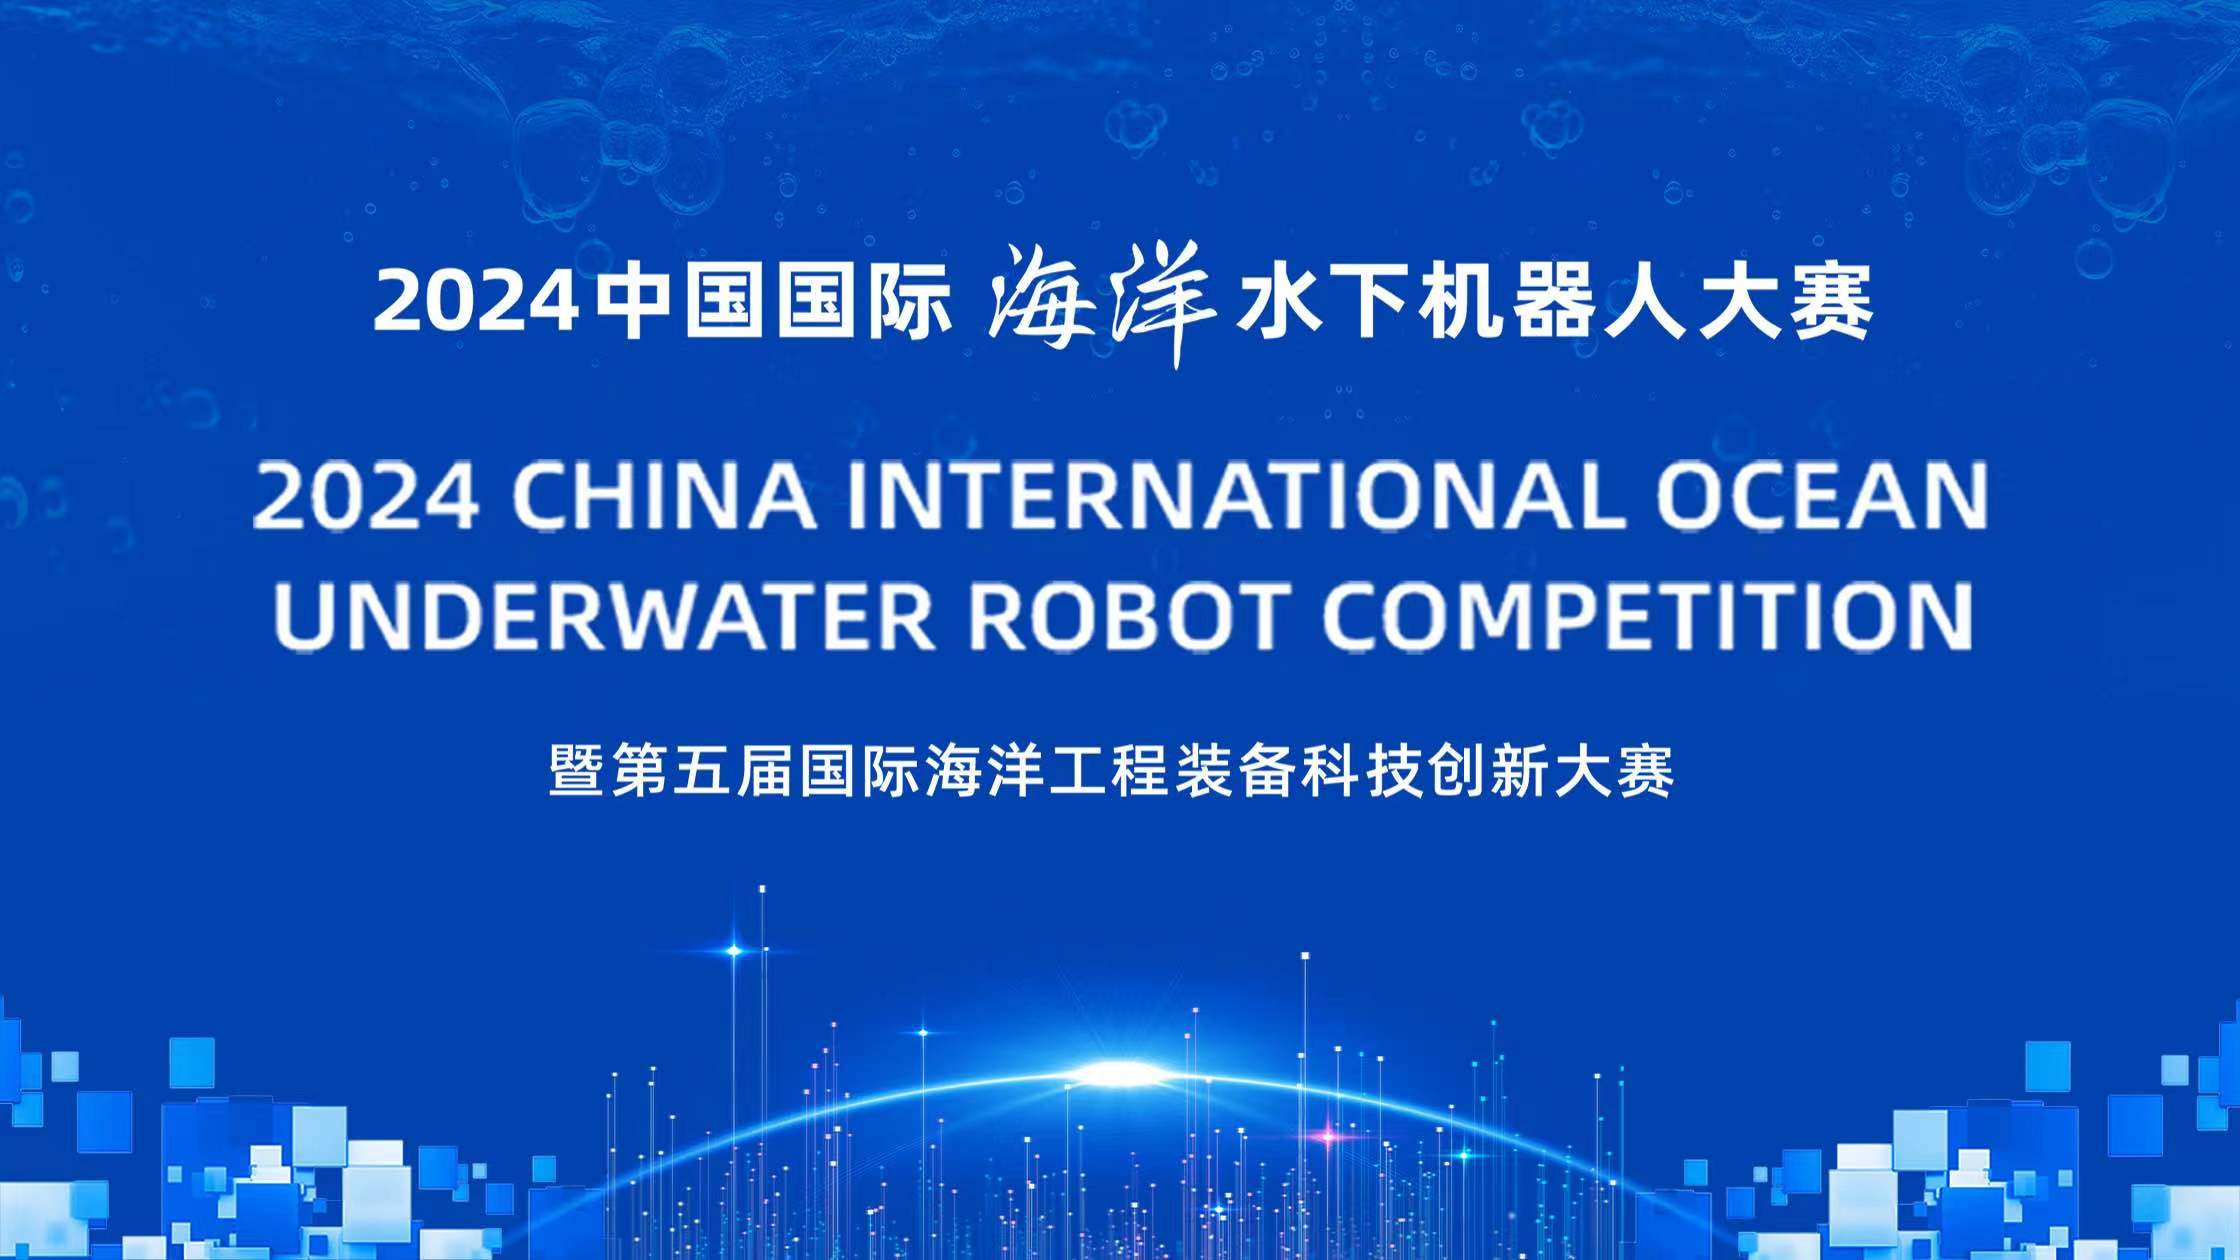 Live: Exploring innovation – The 2024 China International Ocean Underwater Robot Competition